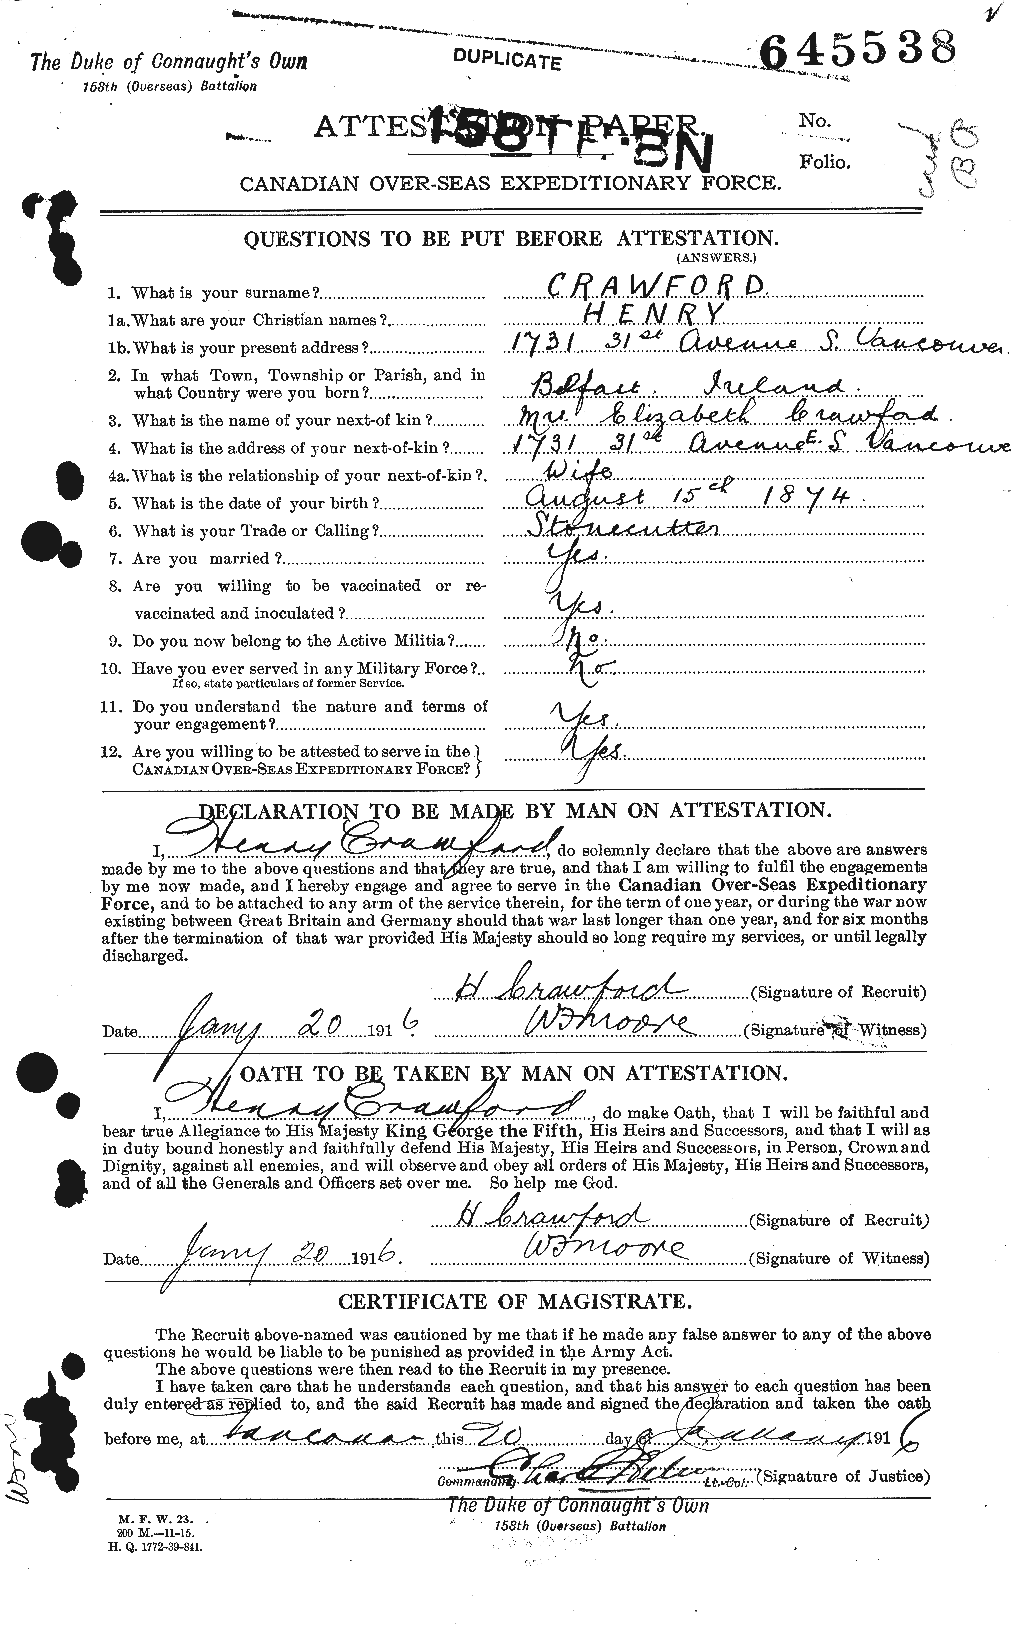 Personnel Records of the First World War - CEF 060572a